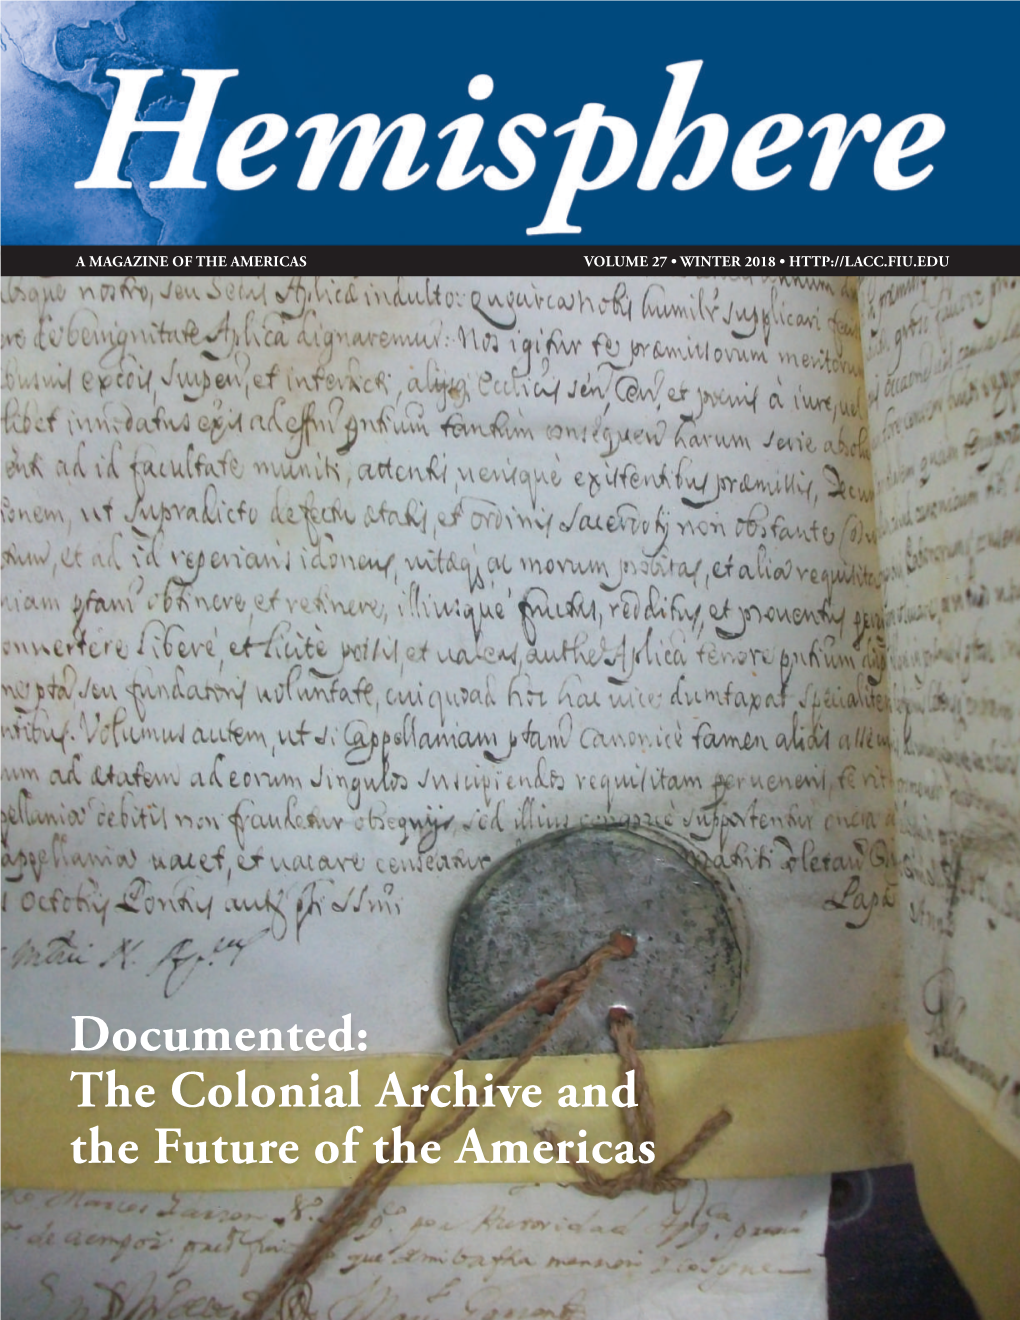 Documented: the Colonial Archive and the Future of the Americas